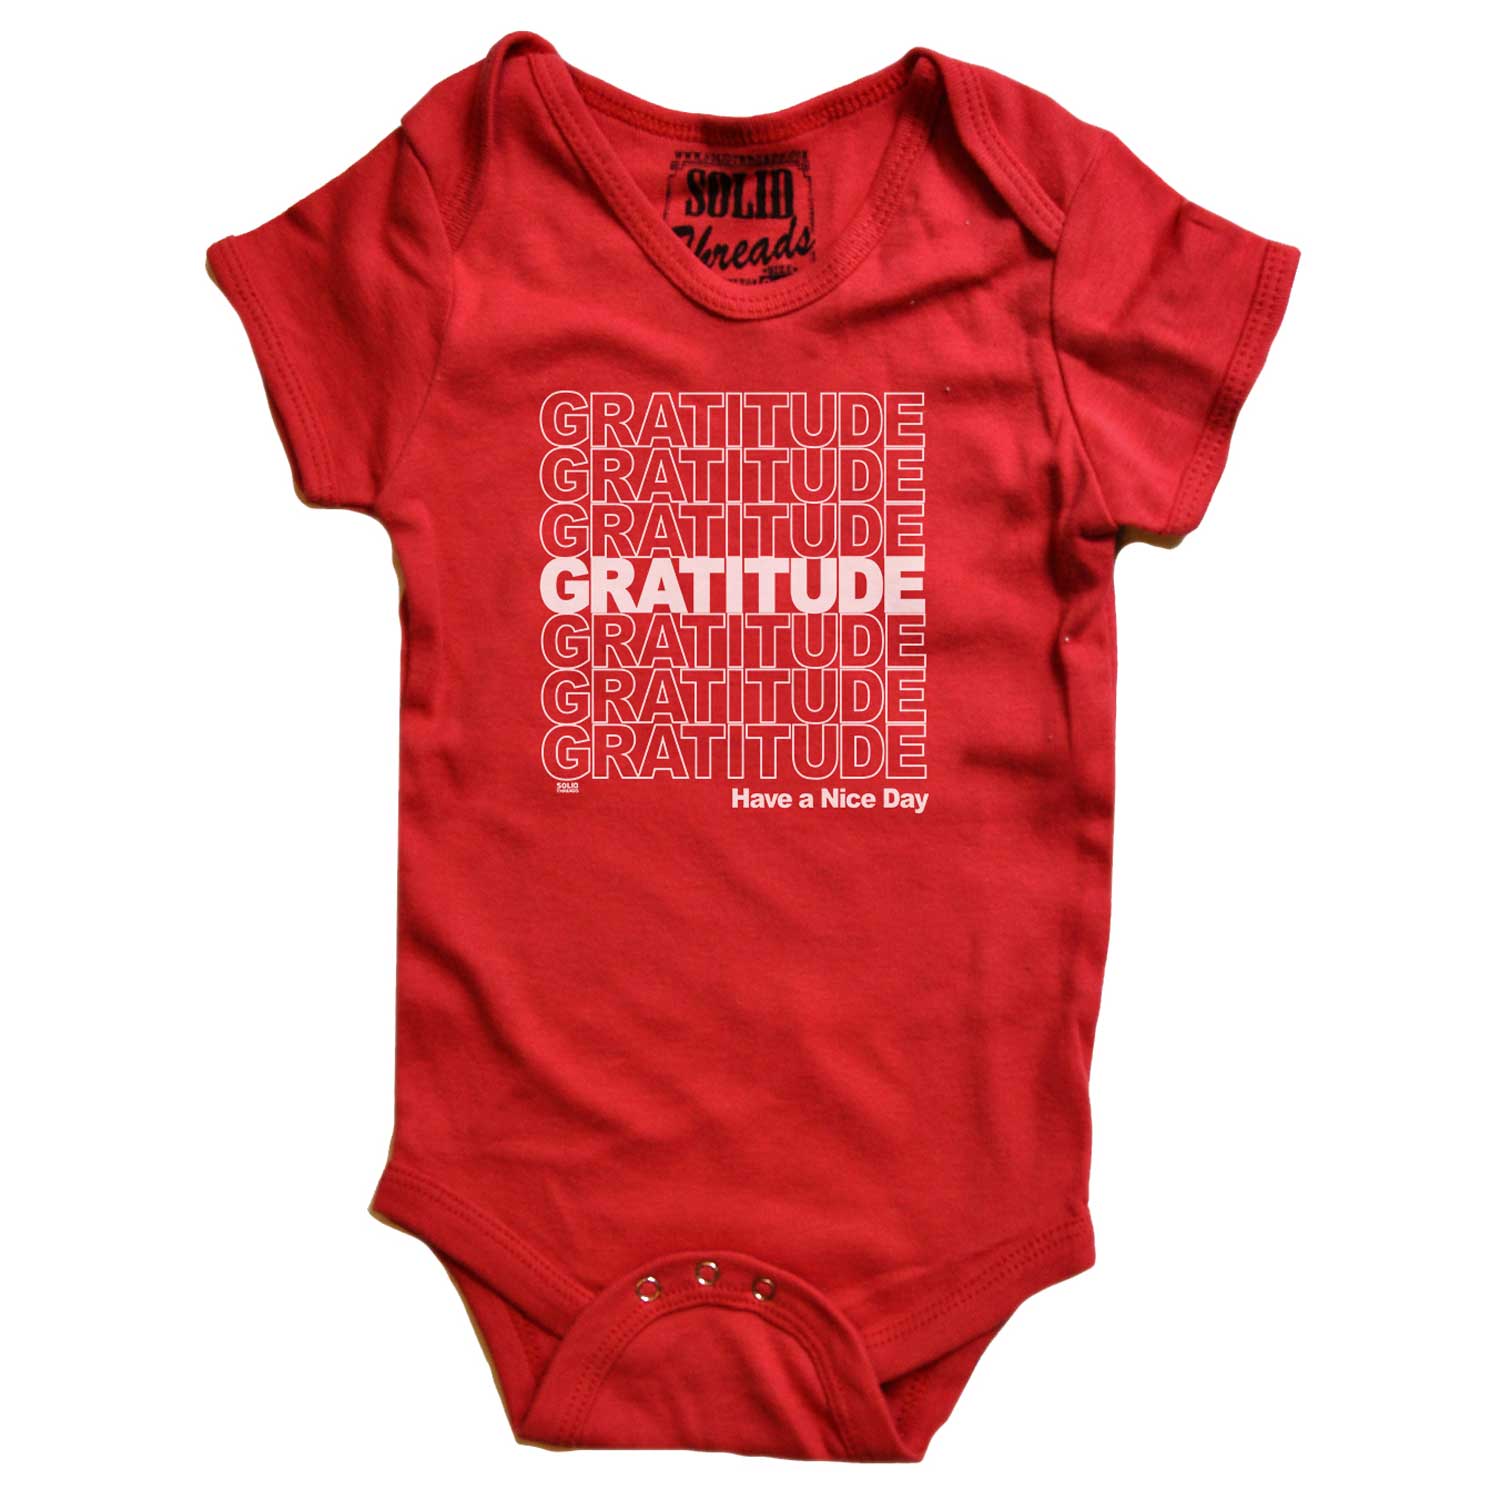 Baby Gratitude Retro Mindfulness Graphic One Piece | Cute Have a Nice Day Romper | Solid Threads